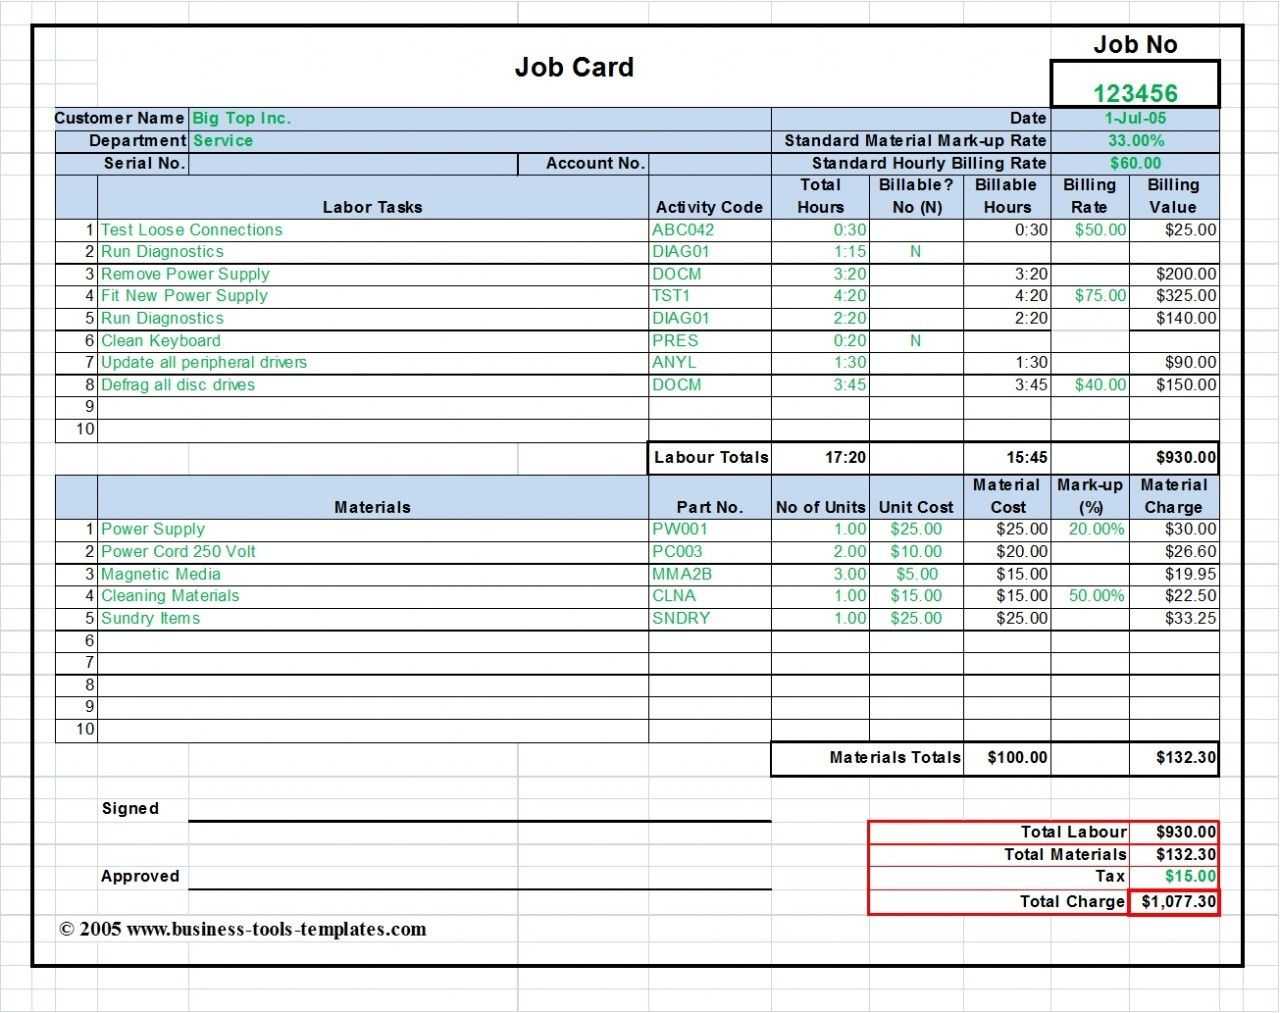 Workshop Job Card Template Excel, Labor & Material Cost Within Construction Cost Report Template